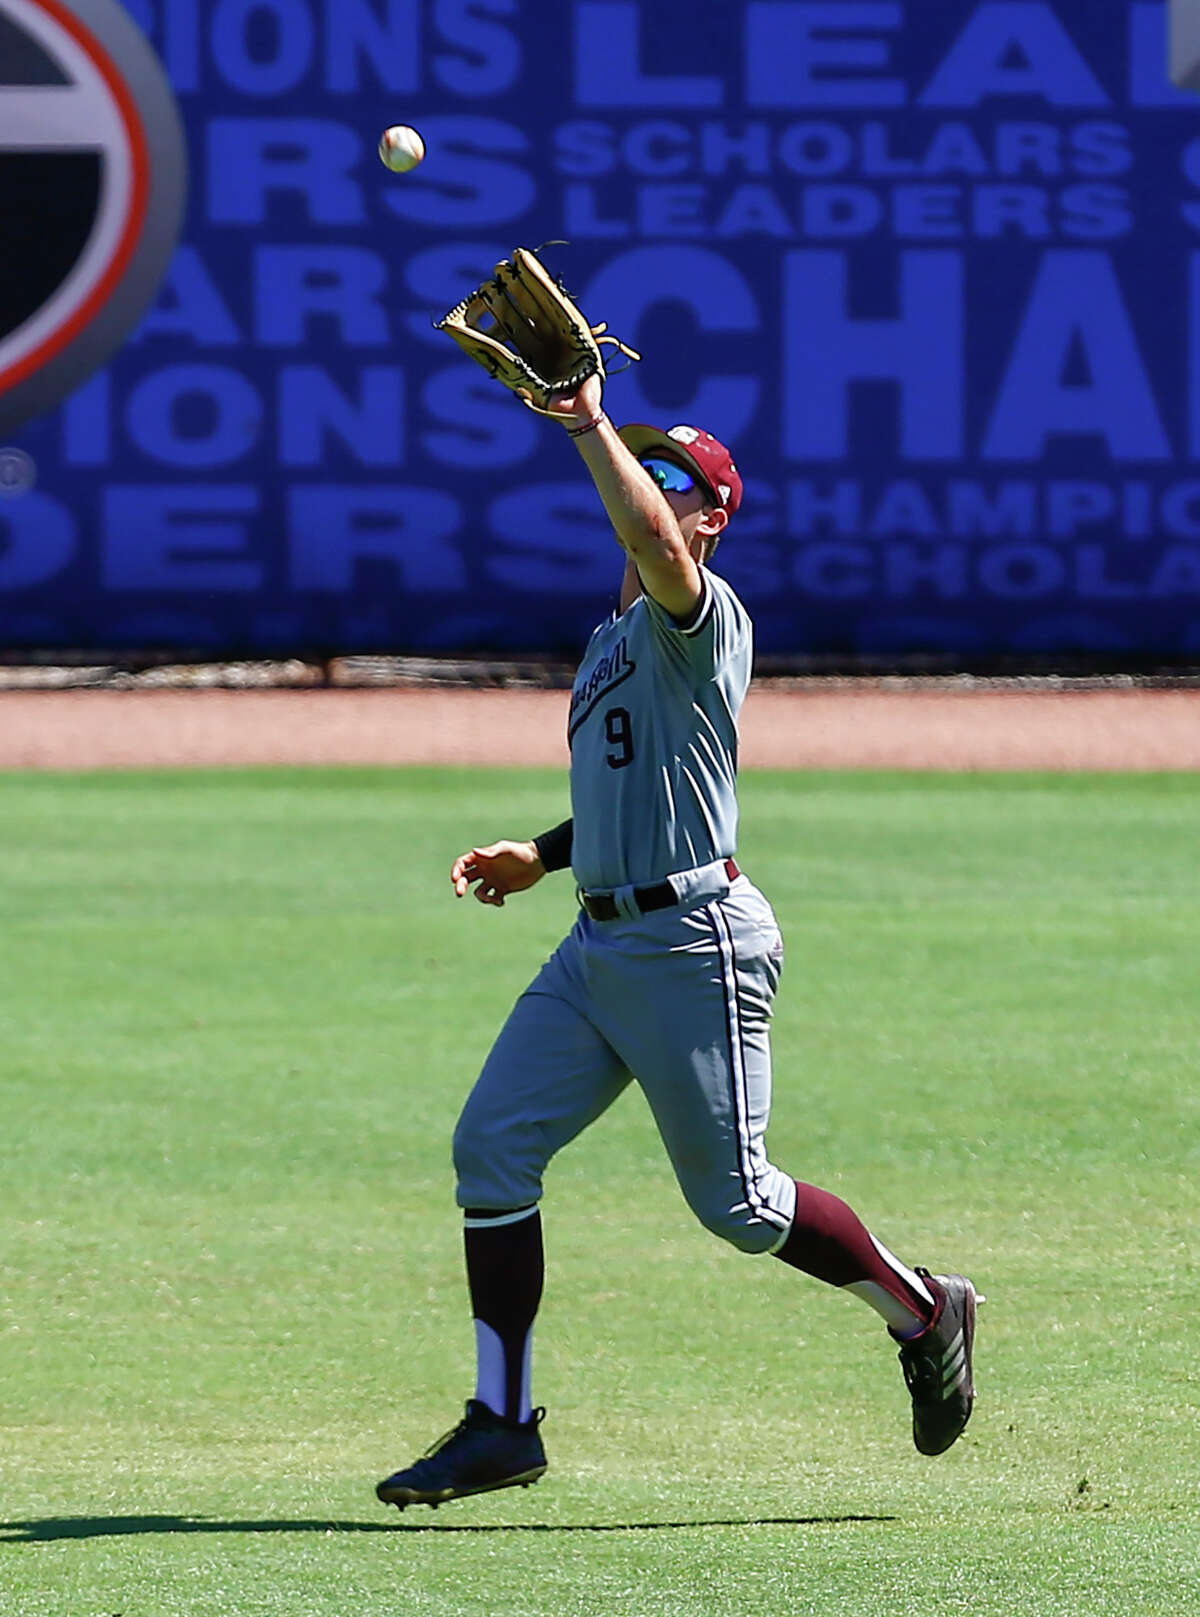 Texas A&M center fielder Zach Deloach catches a pop fly for the out on Georgia's Tucker Maxwell during the third inning of the Southeastern Conference tournament NCAA college baseball game, Wednesday, May 22, 2019, in Hoover, Ala. (AP Photo/Butch Dill)